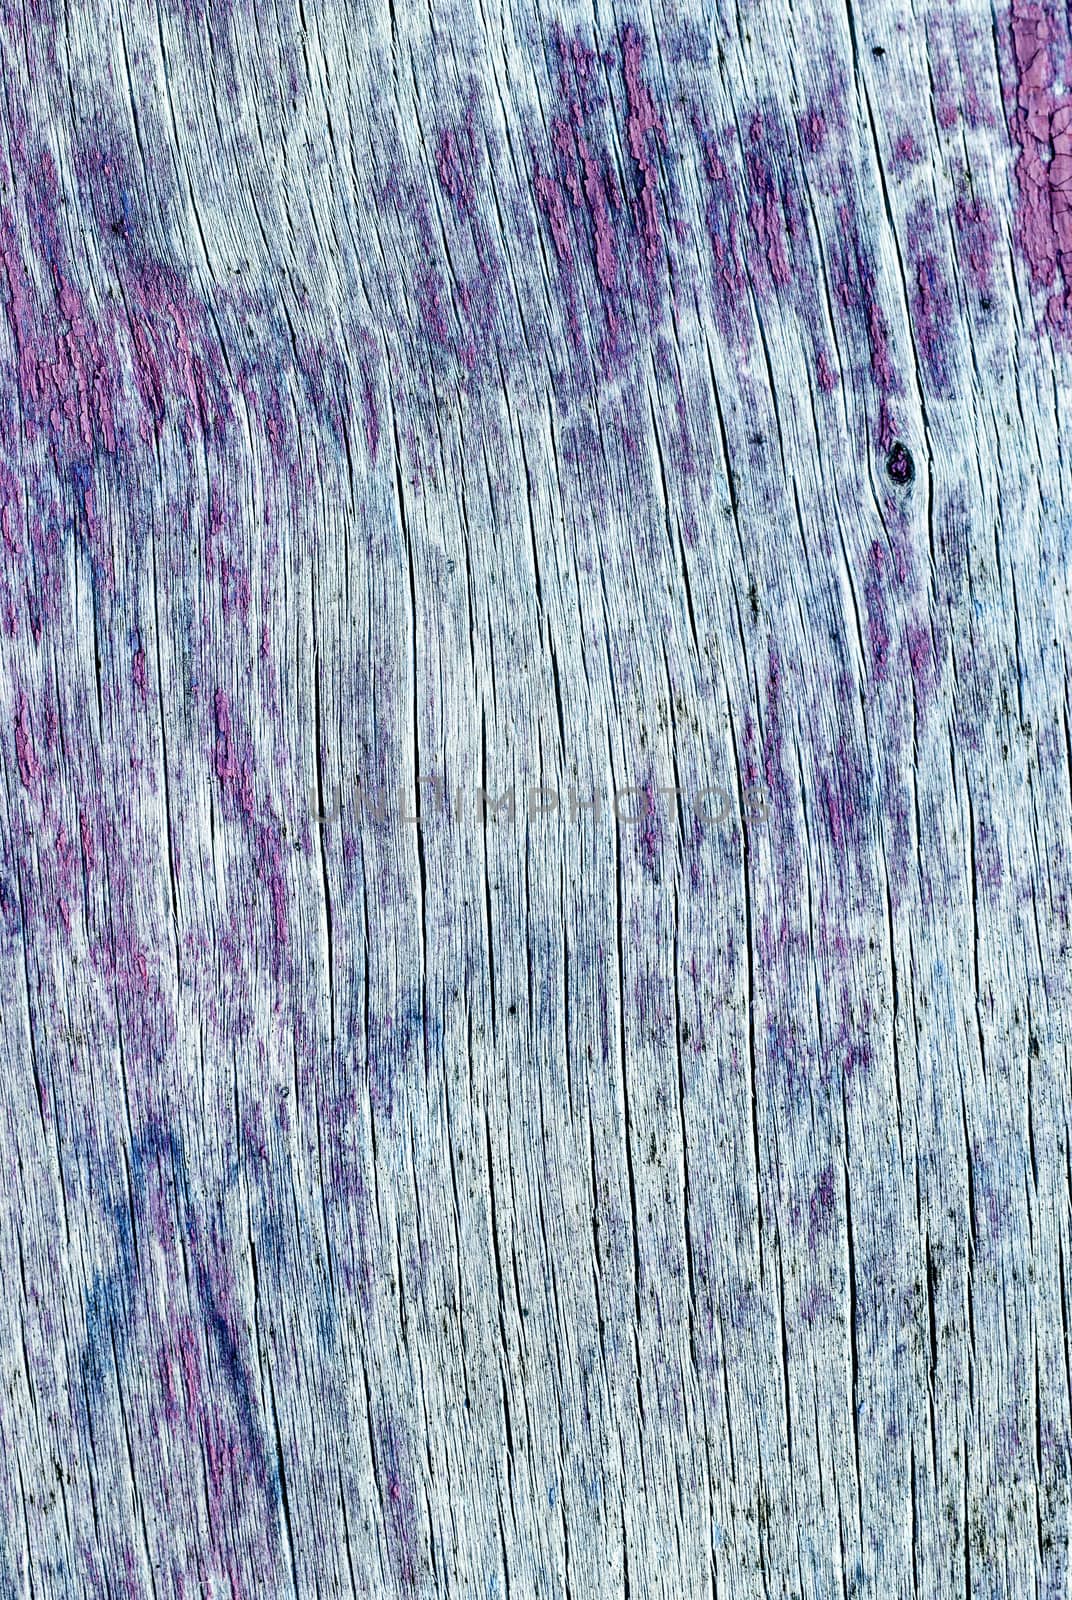 texture of old painted wood